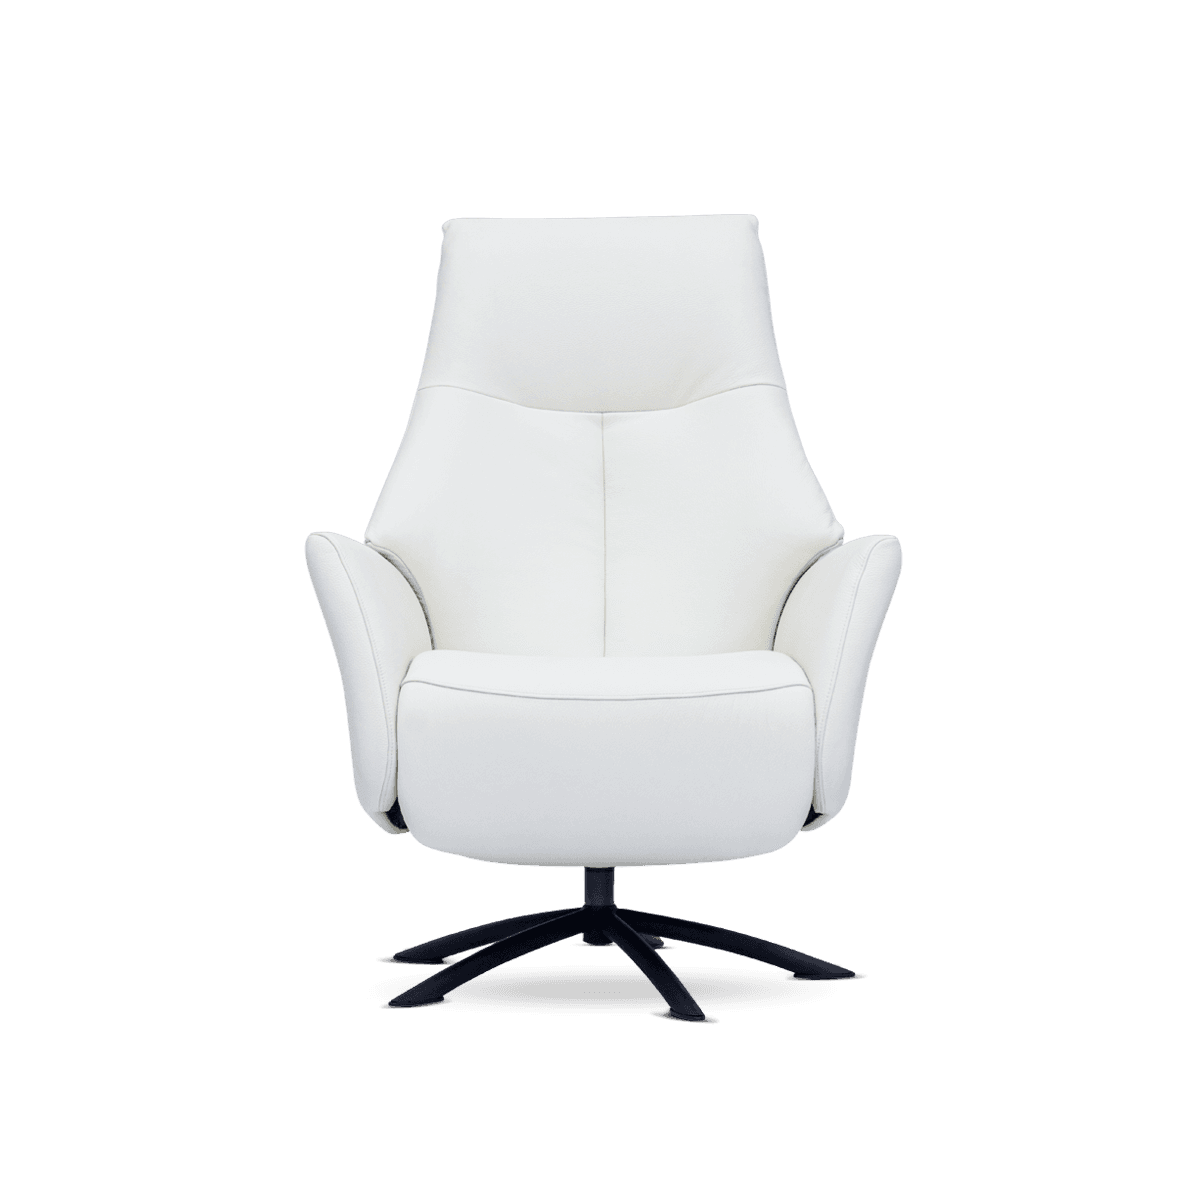 Styluz Recliner Chair,Pure White,Leather